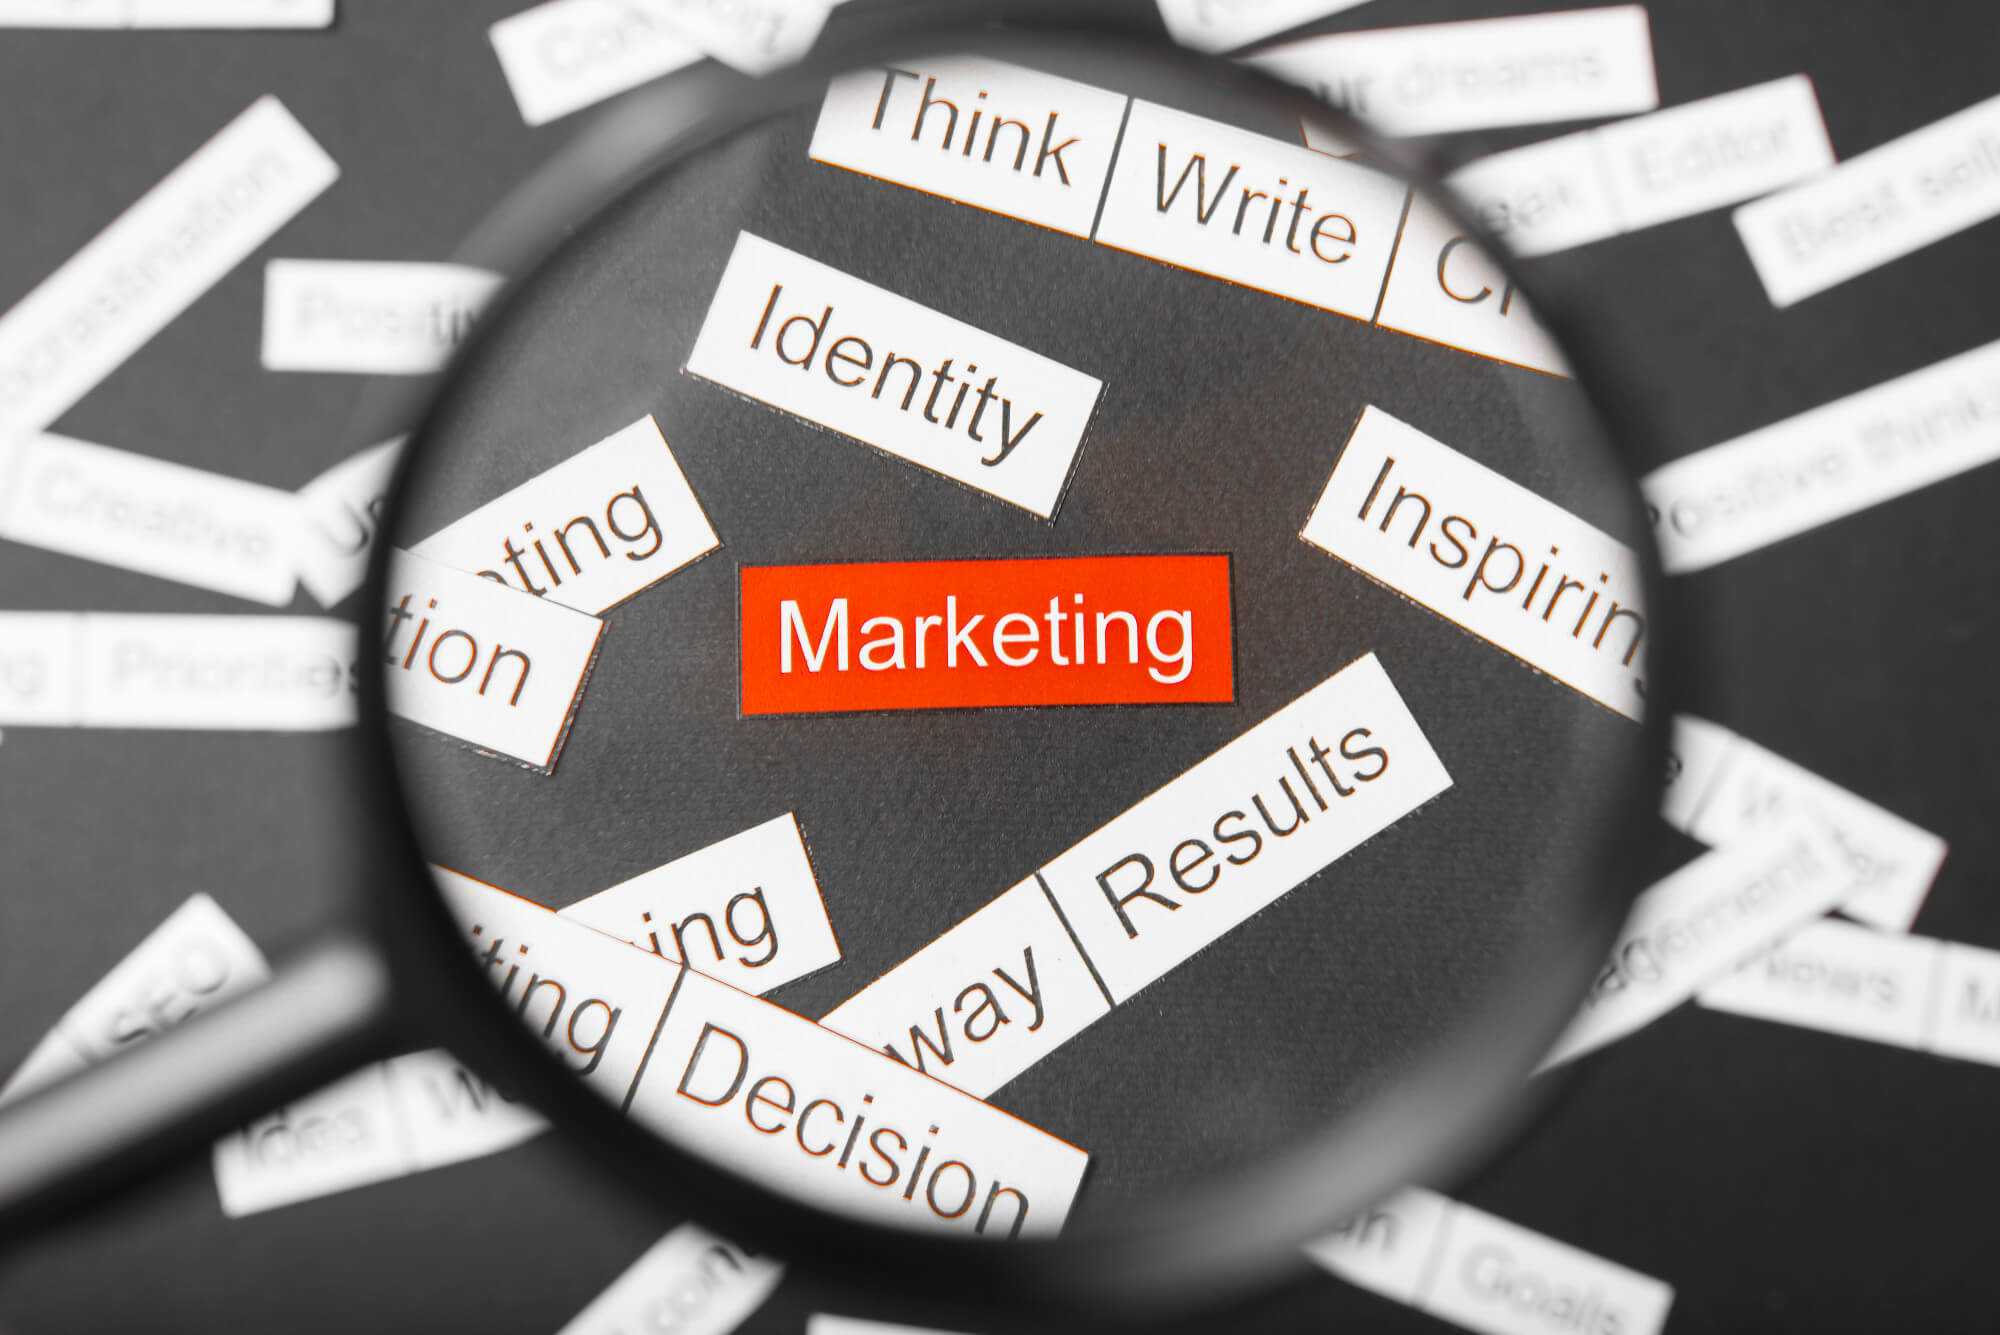 Marketing Magnified